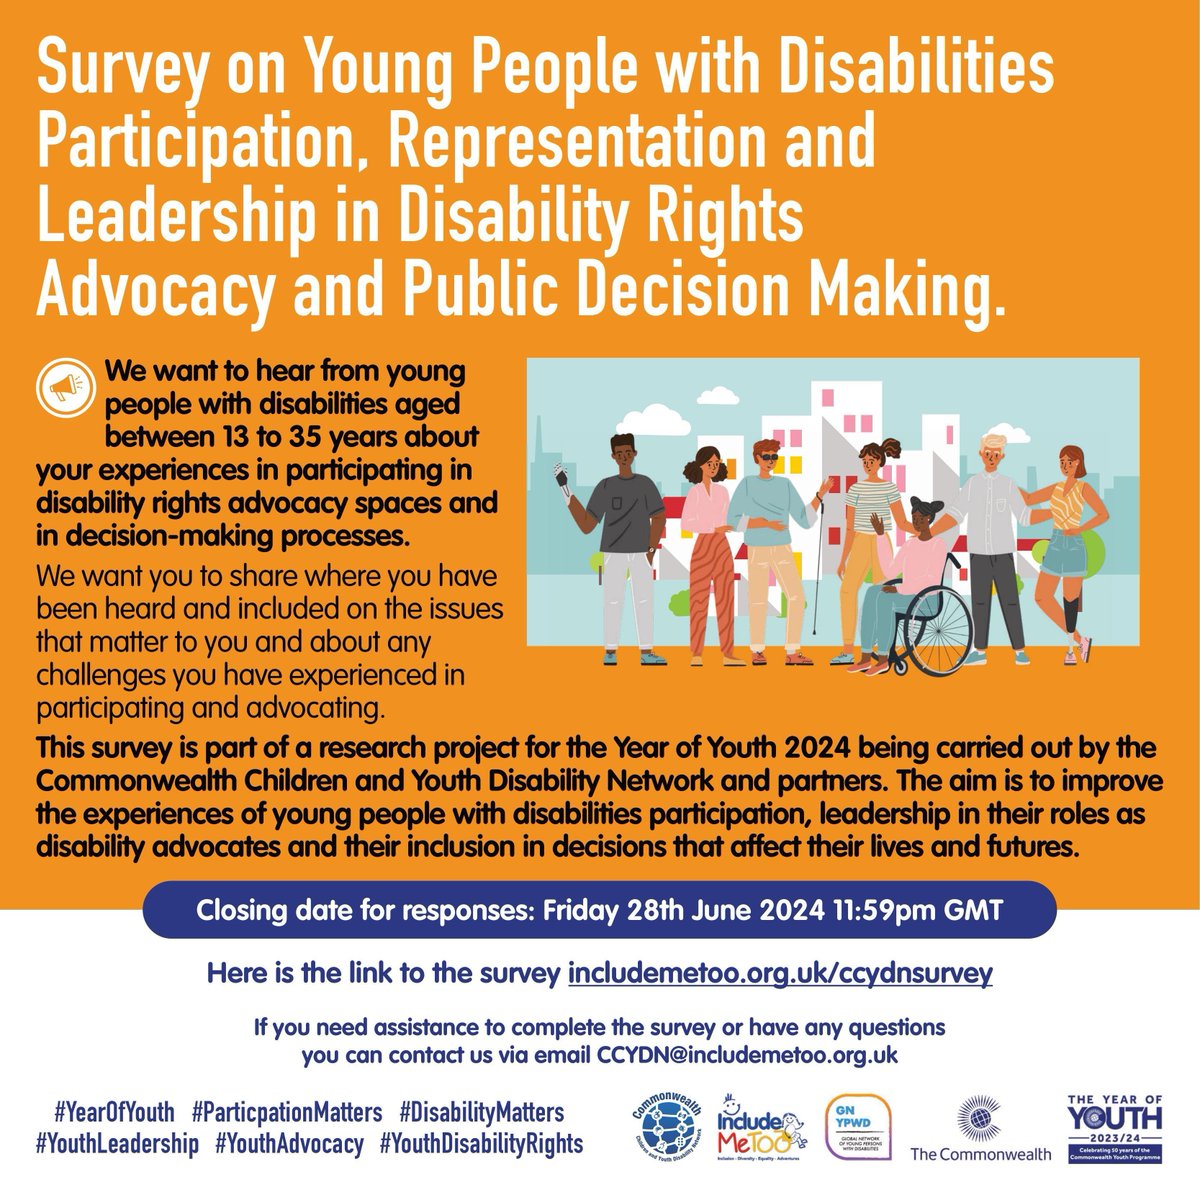 @ComSecYouth is enhancing the involvement, representation and leadership of young people with disabilities in advocacy and public decision making. To participate in the survey 👉 buff.ly/448RJj5 @CCYDNetwork @IncludeMeTOO #YearofYouth